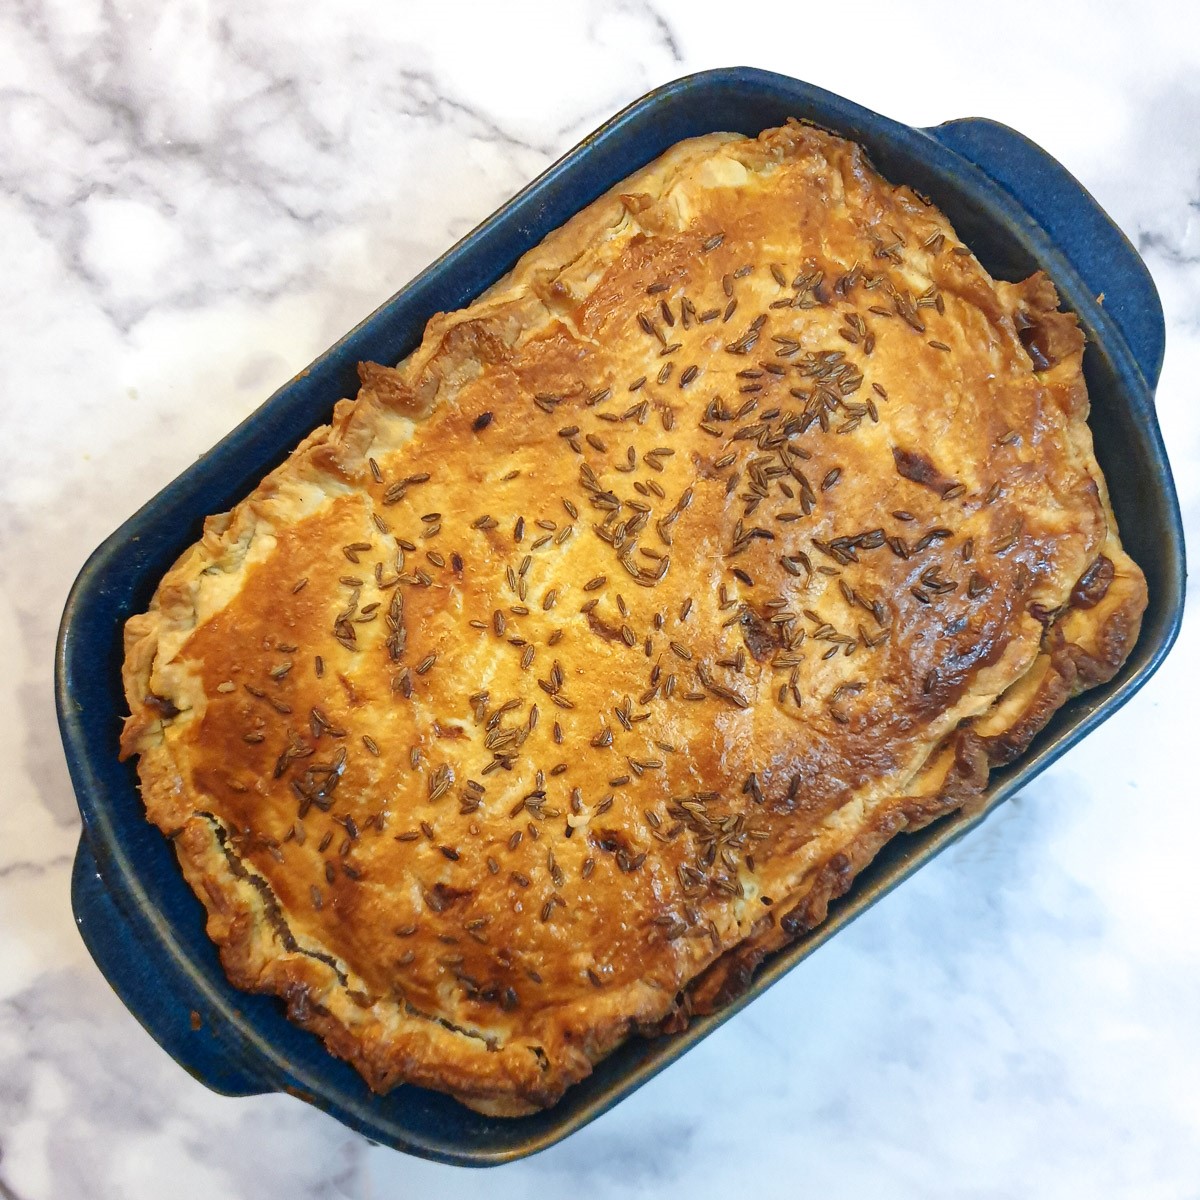 Overhead shot of a baked Moroccan lamb pie in a blue dish.